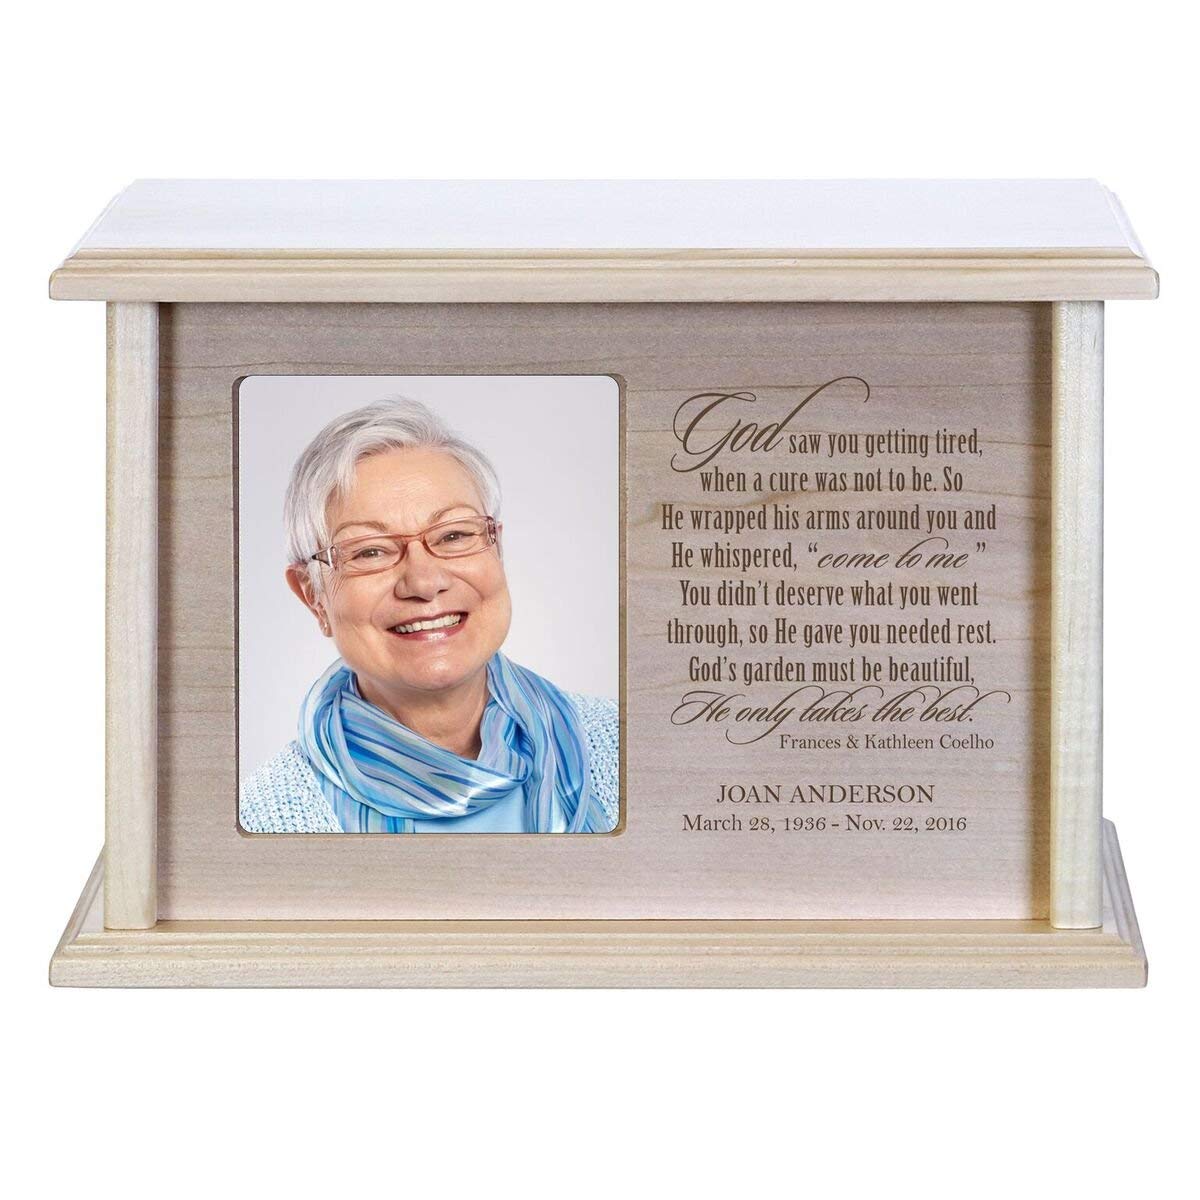 Custom Wooden Cremation Urn with Picture Frame holds 4x5 photo God Saw You Getting Tired (Poem) - LifeSong Milestones